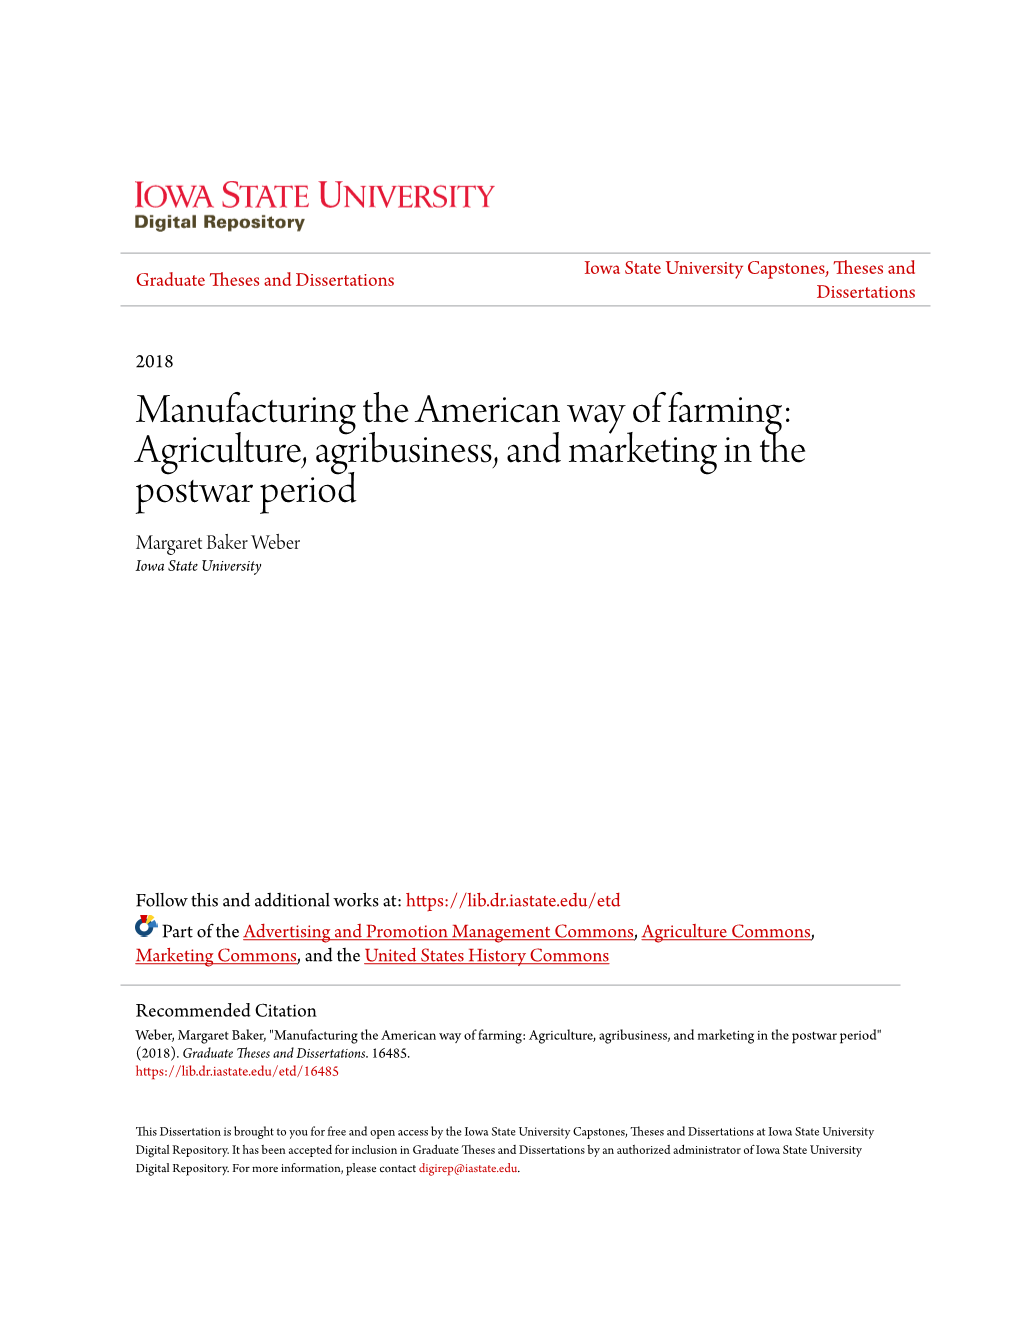 Agriculture, Agribusiness, and Marketing in the Postwar Period Margaret Baker Weber Iowa State University